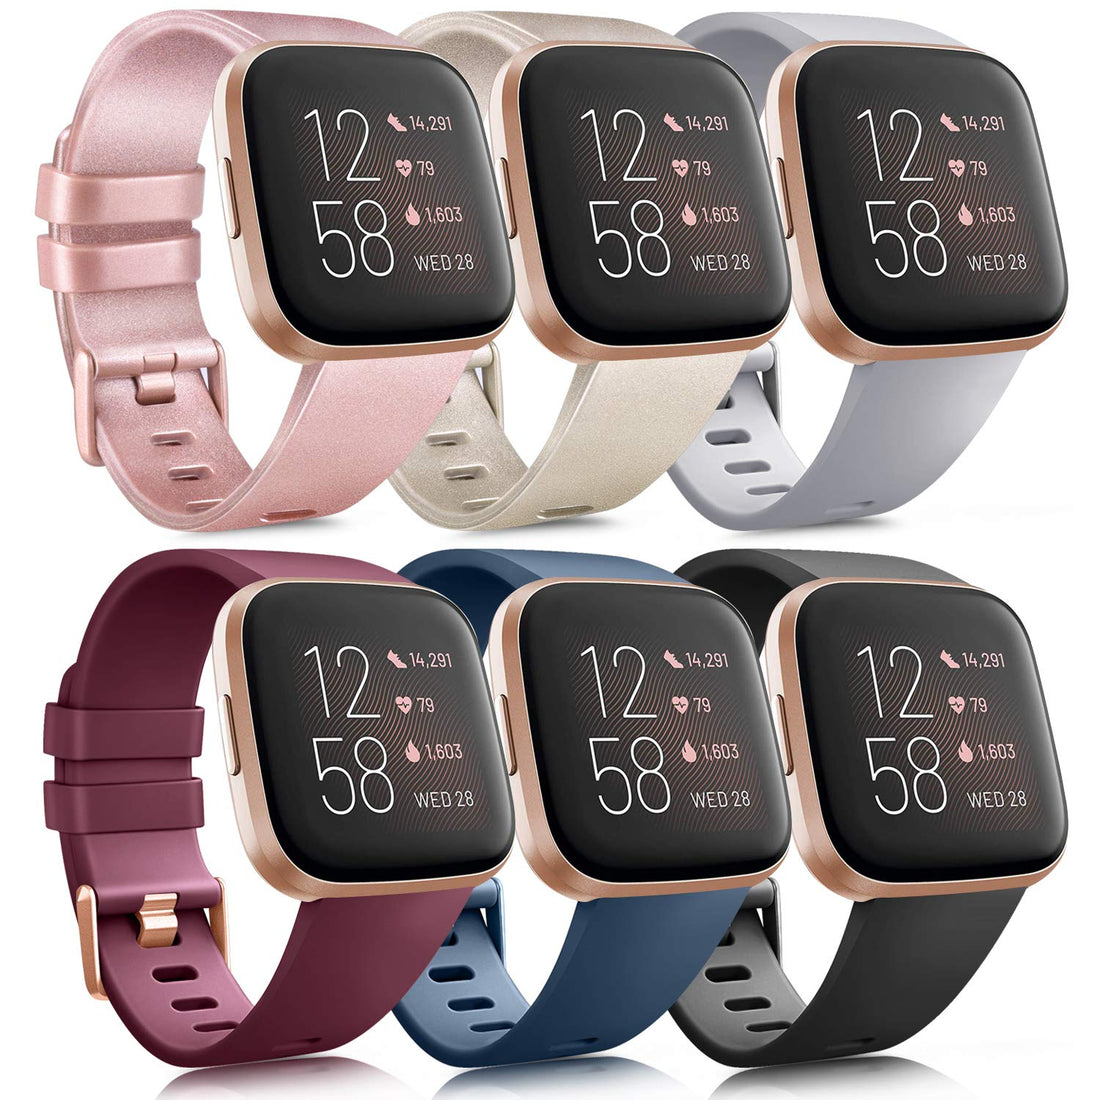 6 Pack Sport Bands Compatible with Fitbit Versa 2 / Fitbit Versa/Versa Lite/Versa SE, Classic Soft Silicone Replacement Wristbands